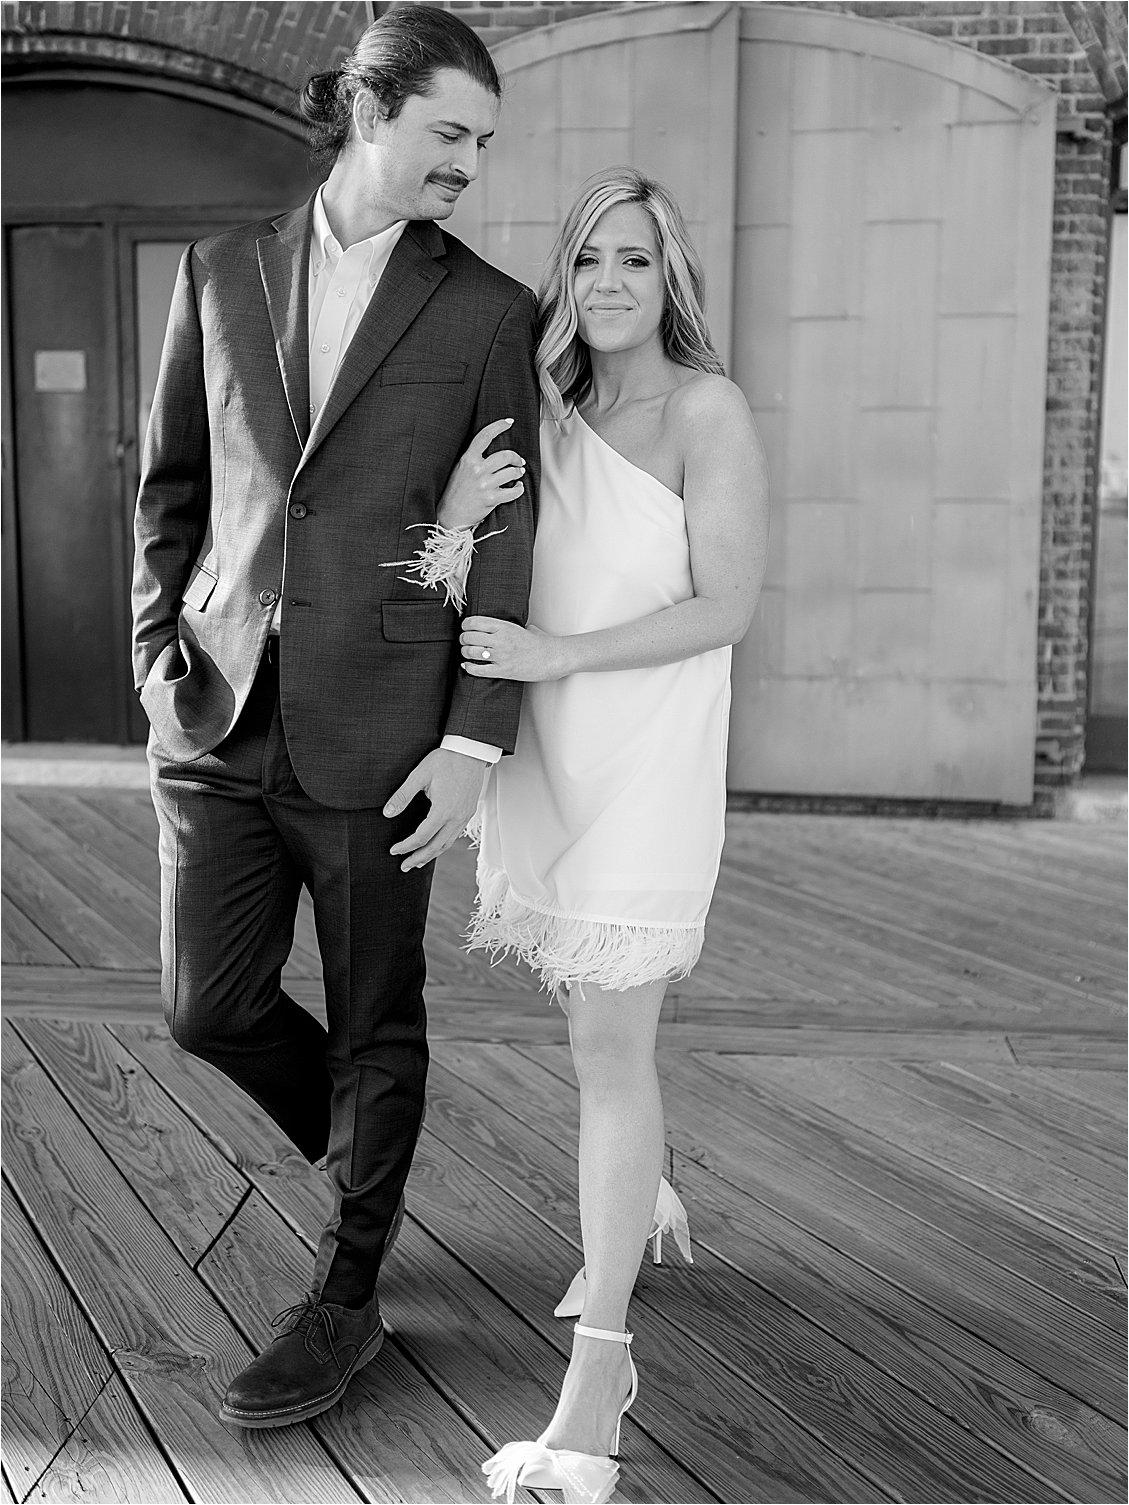 Fells Point engagement session with film wedding photographer, Renee Hollingshead